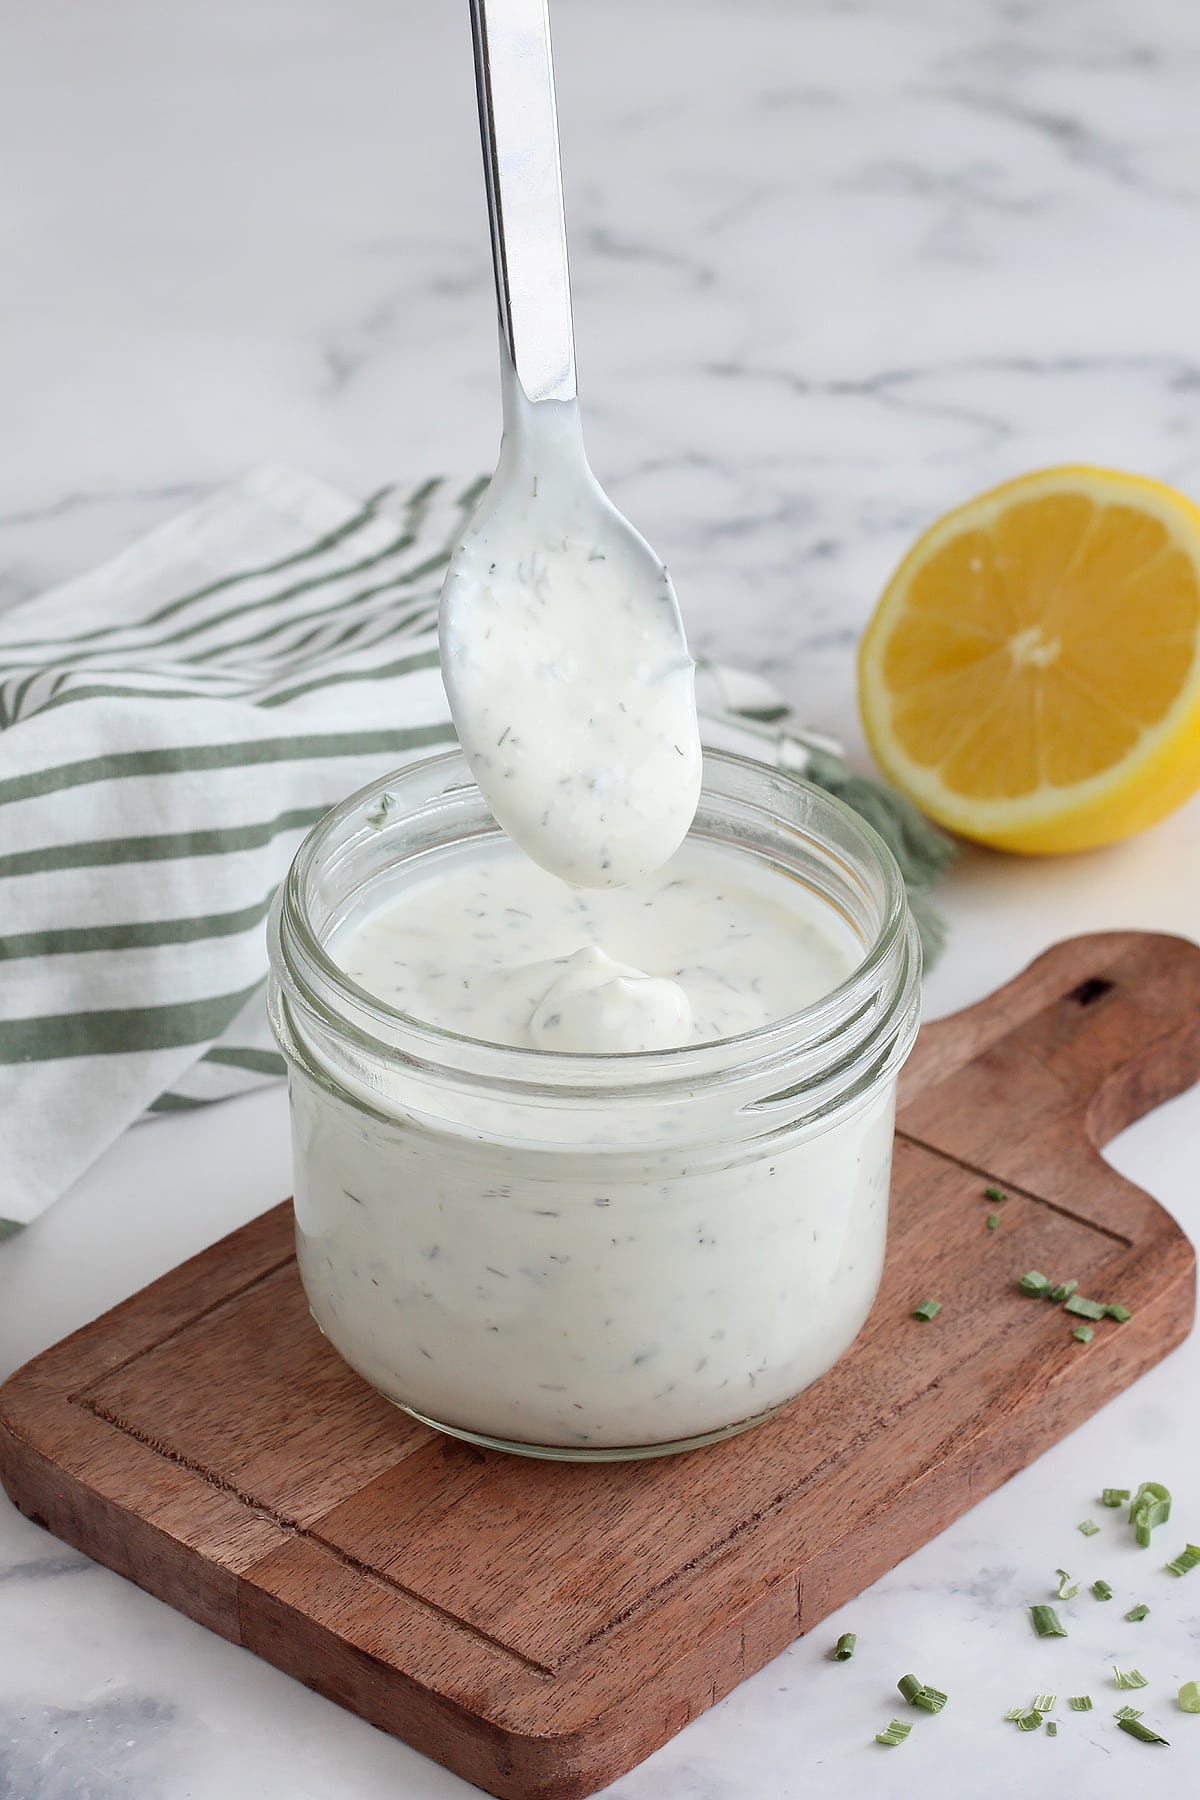 Ranch dressing in a jar, being scooped out with a spoon on a small wooden cutting board.